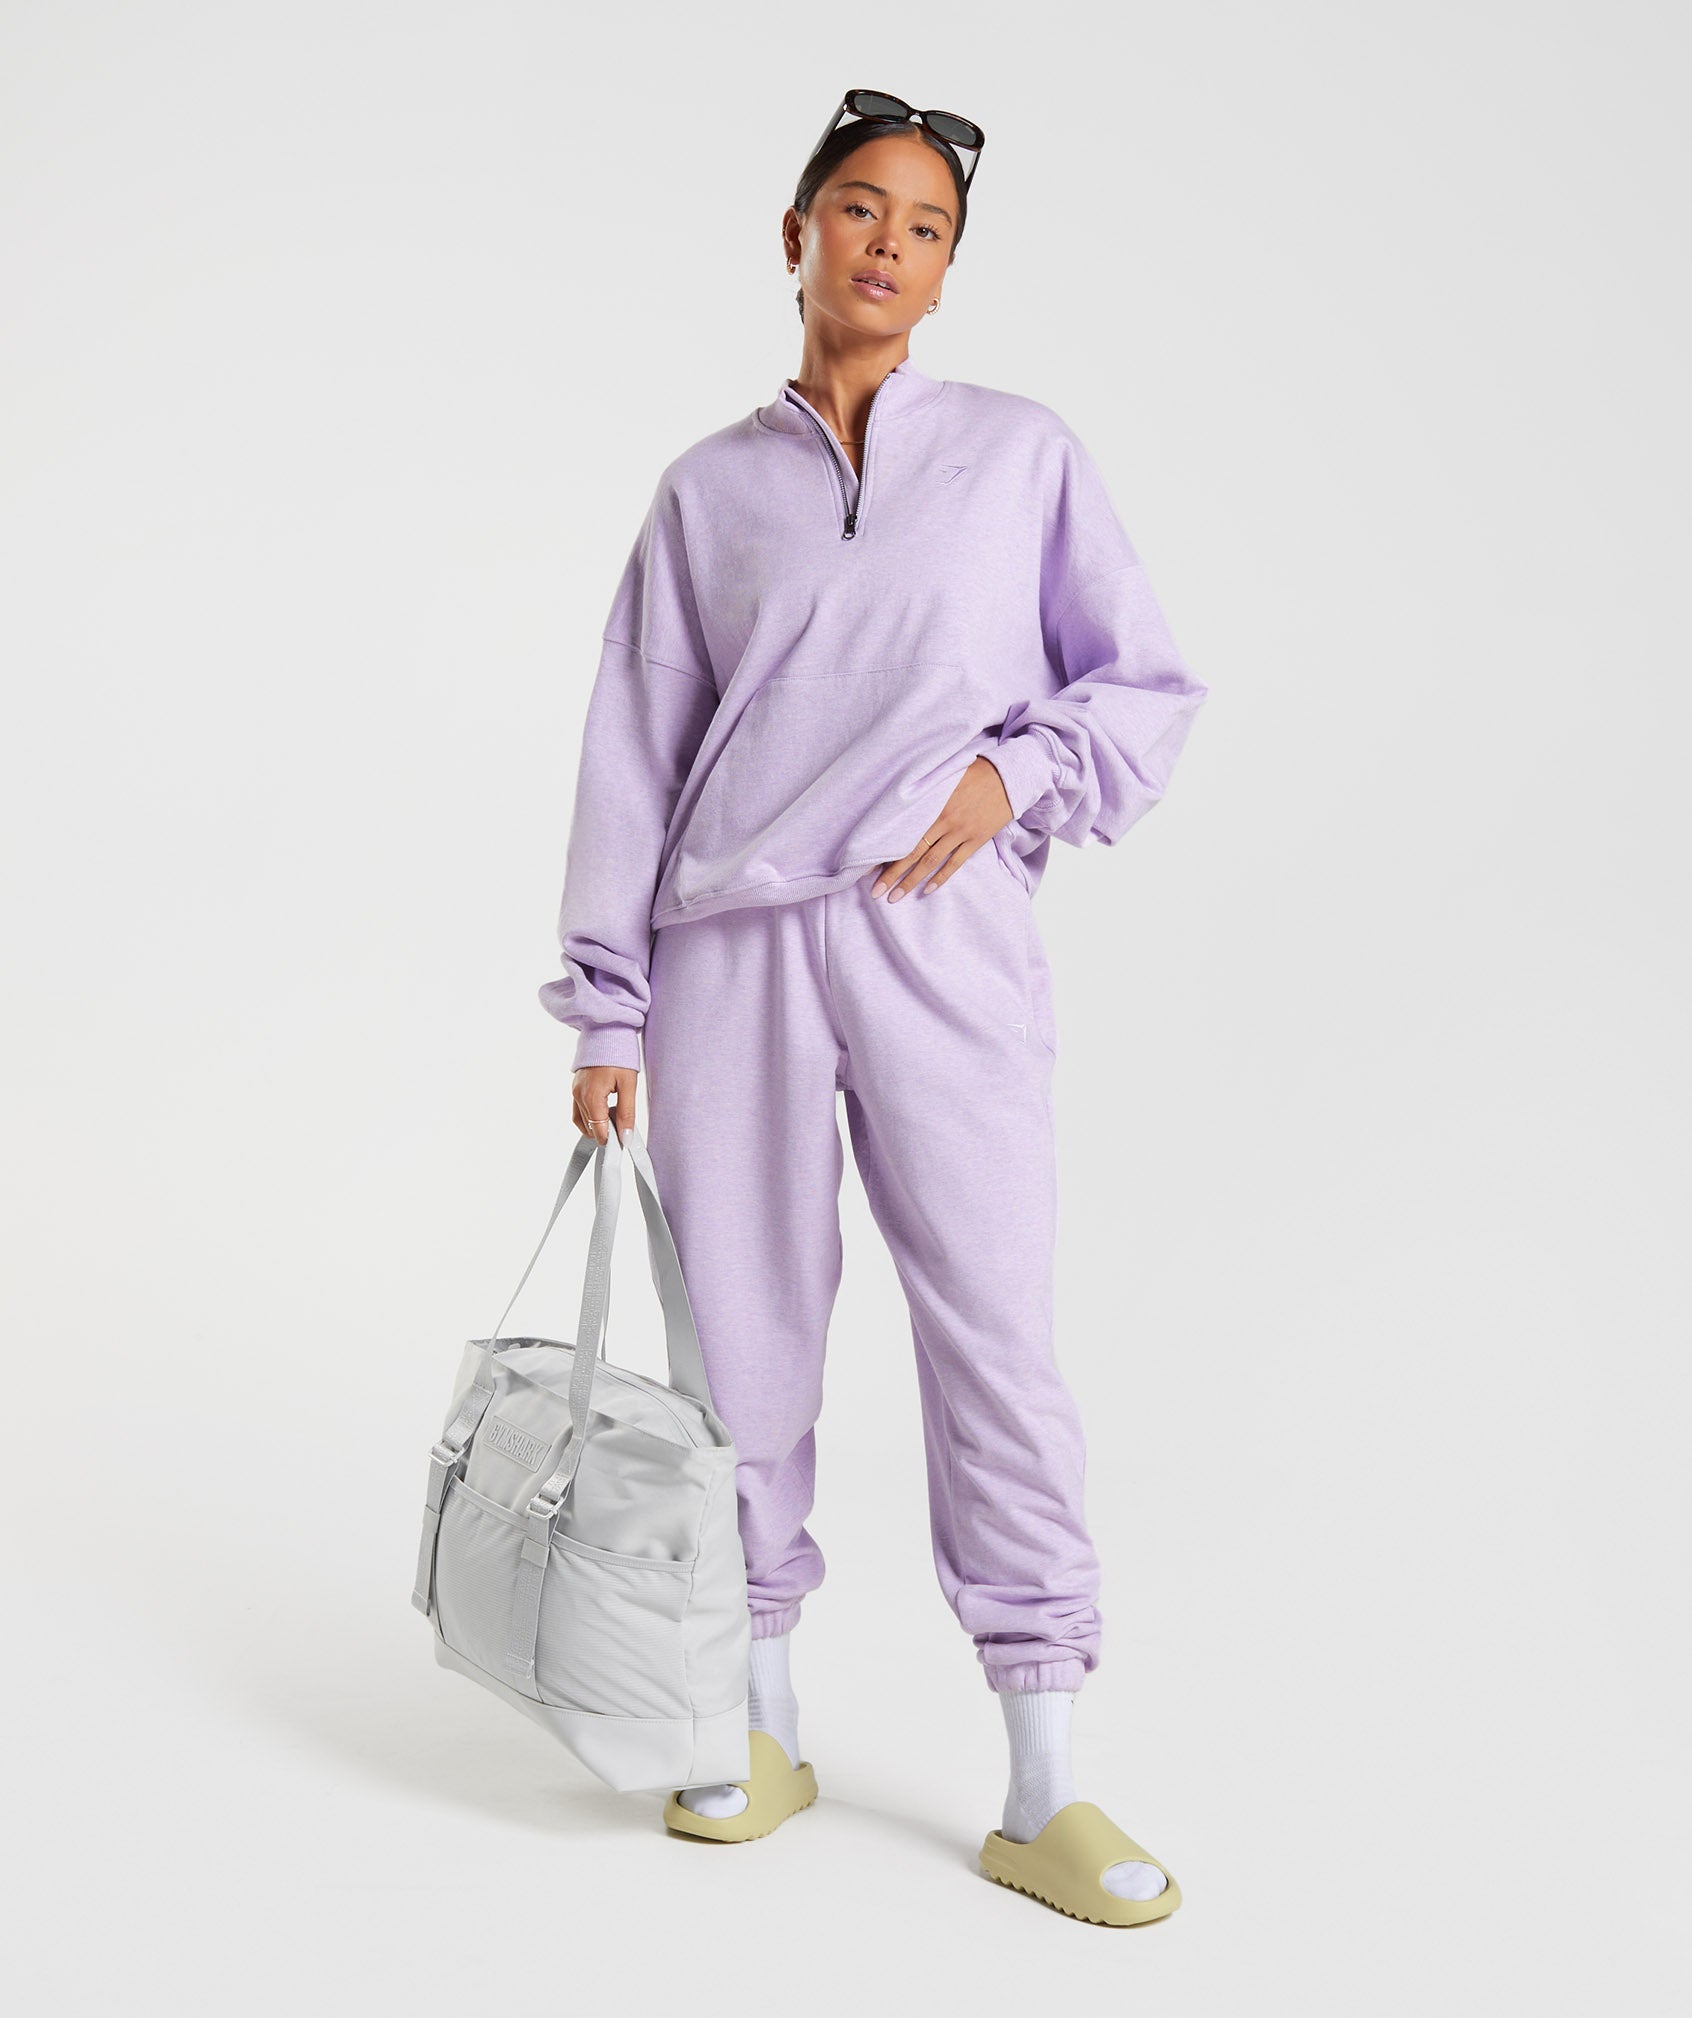 Rest Day Sweats 1/2 Zip Pullover in Aura Lilac Marl